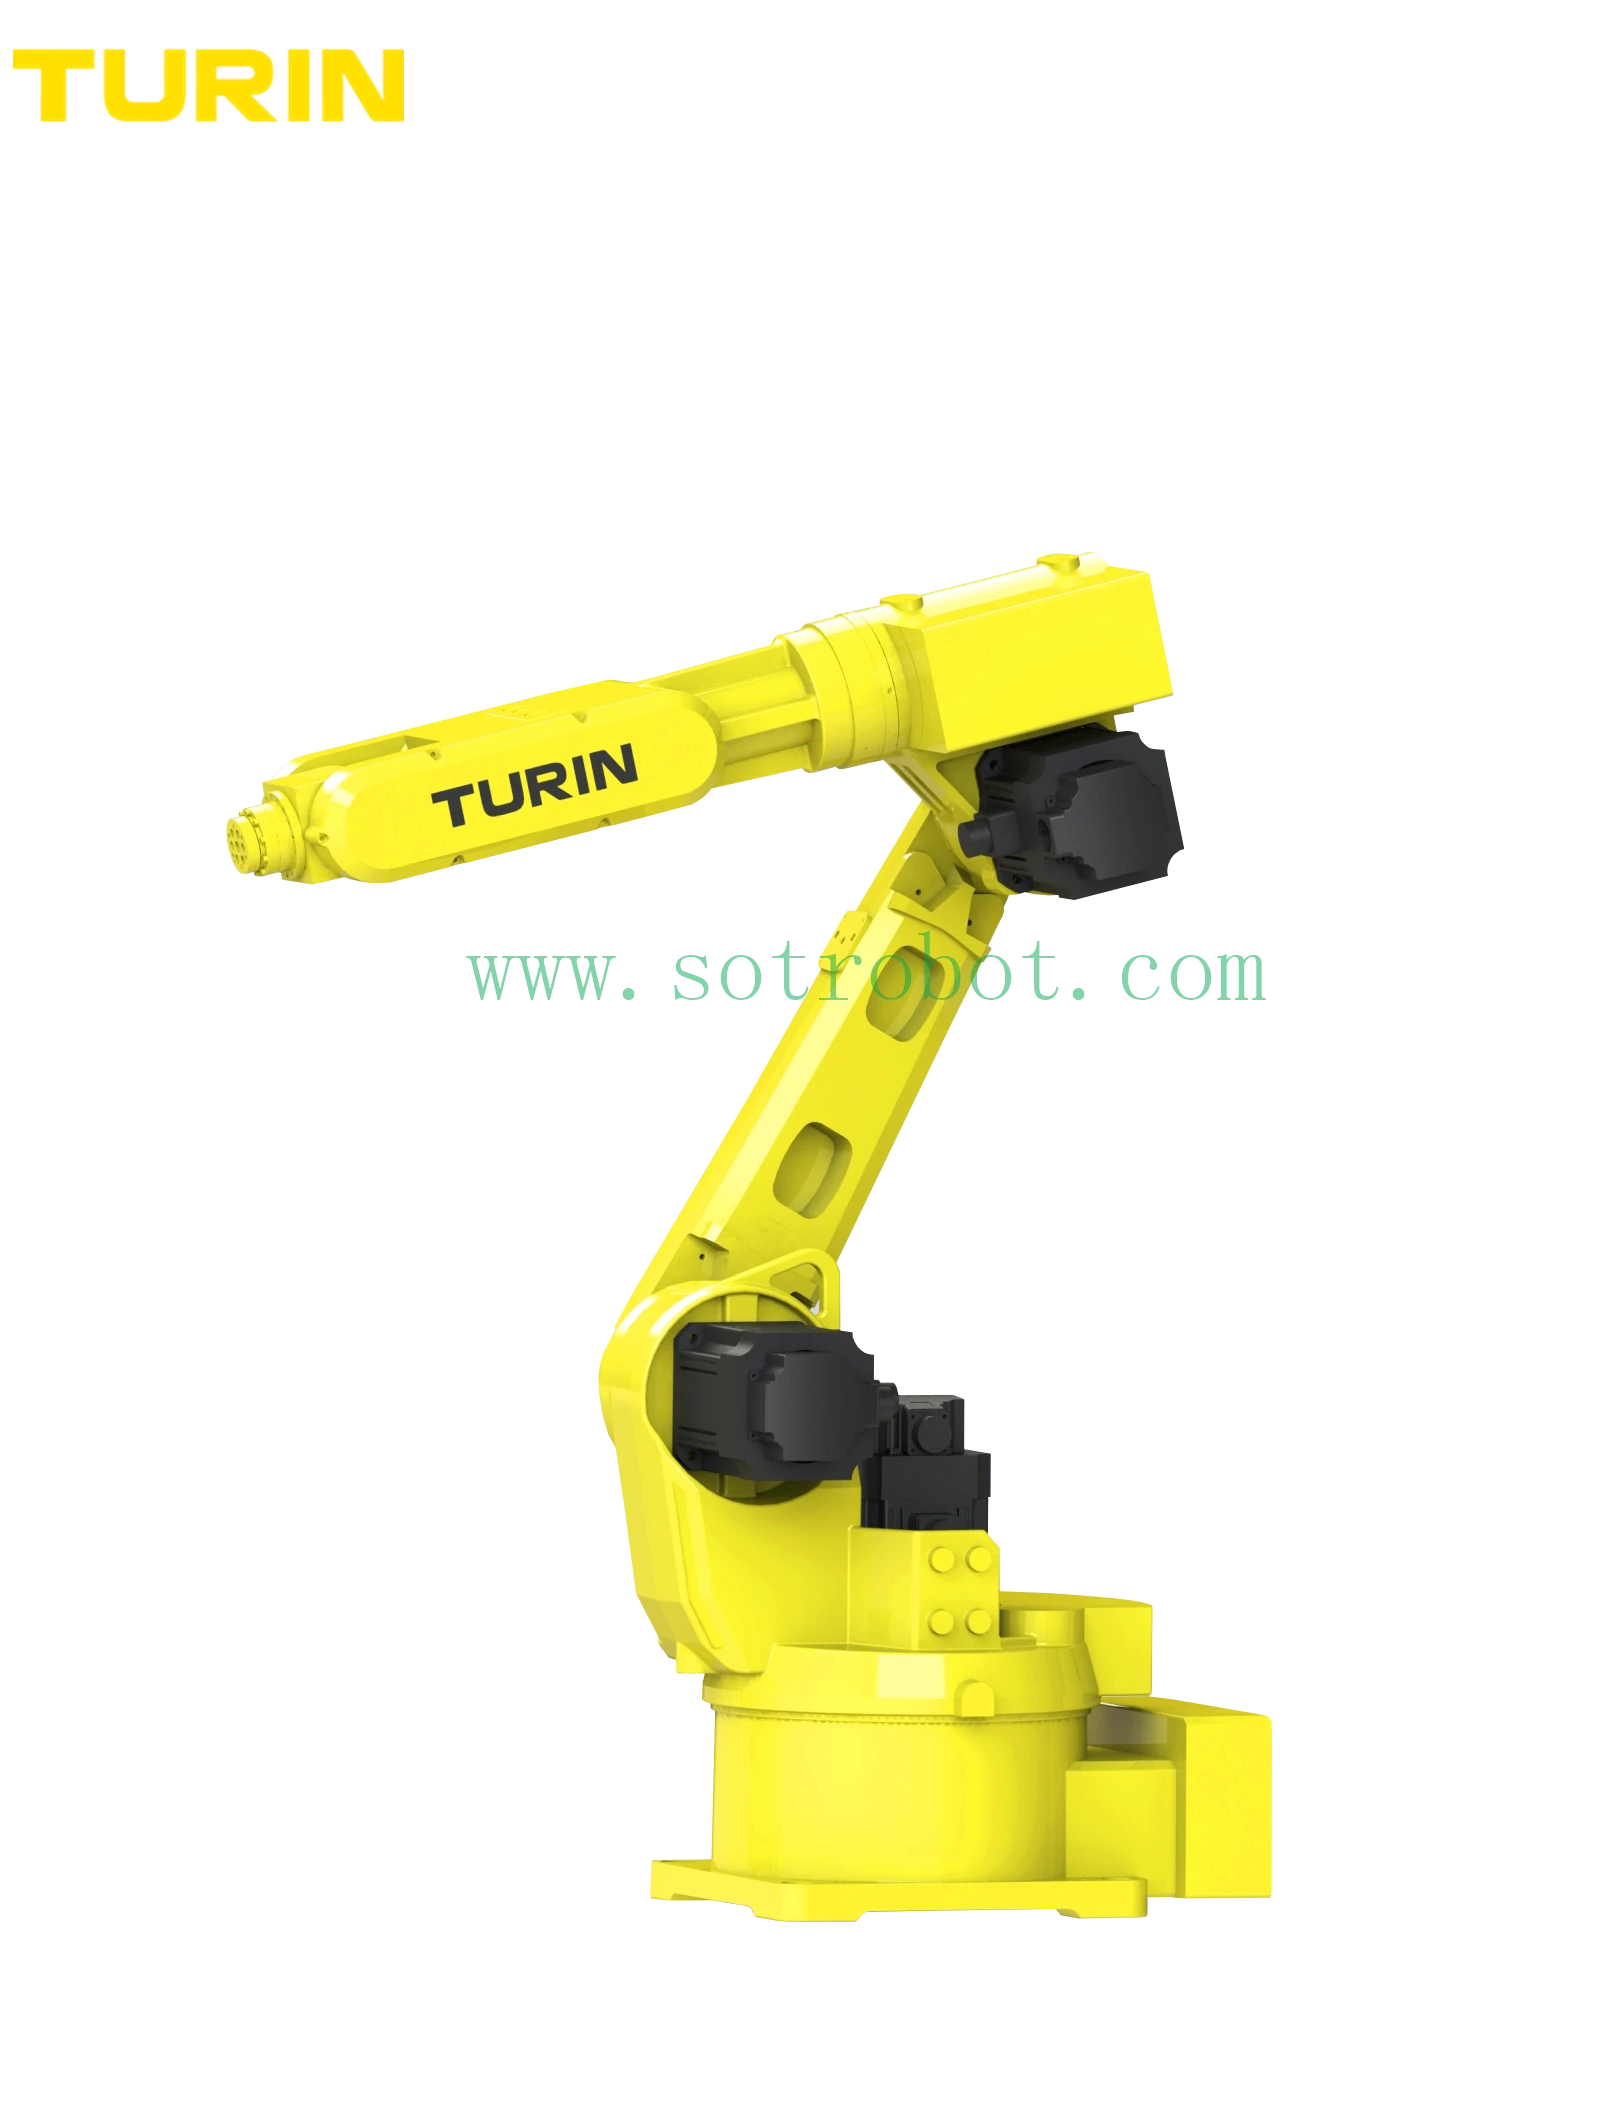 AR1730 6-axis welding robot providing fast and accurate with YRC1000 Robot Controller and teach pedant and RD350 welder